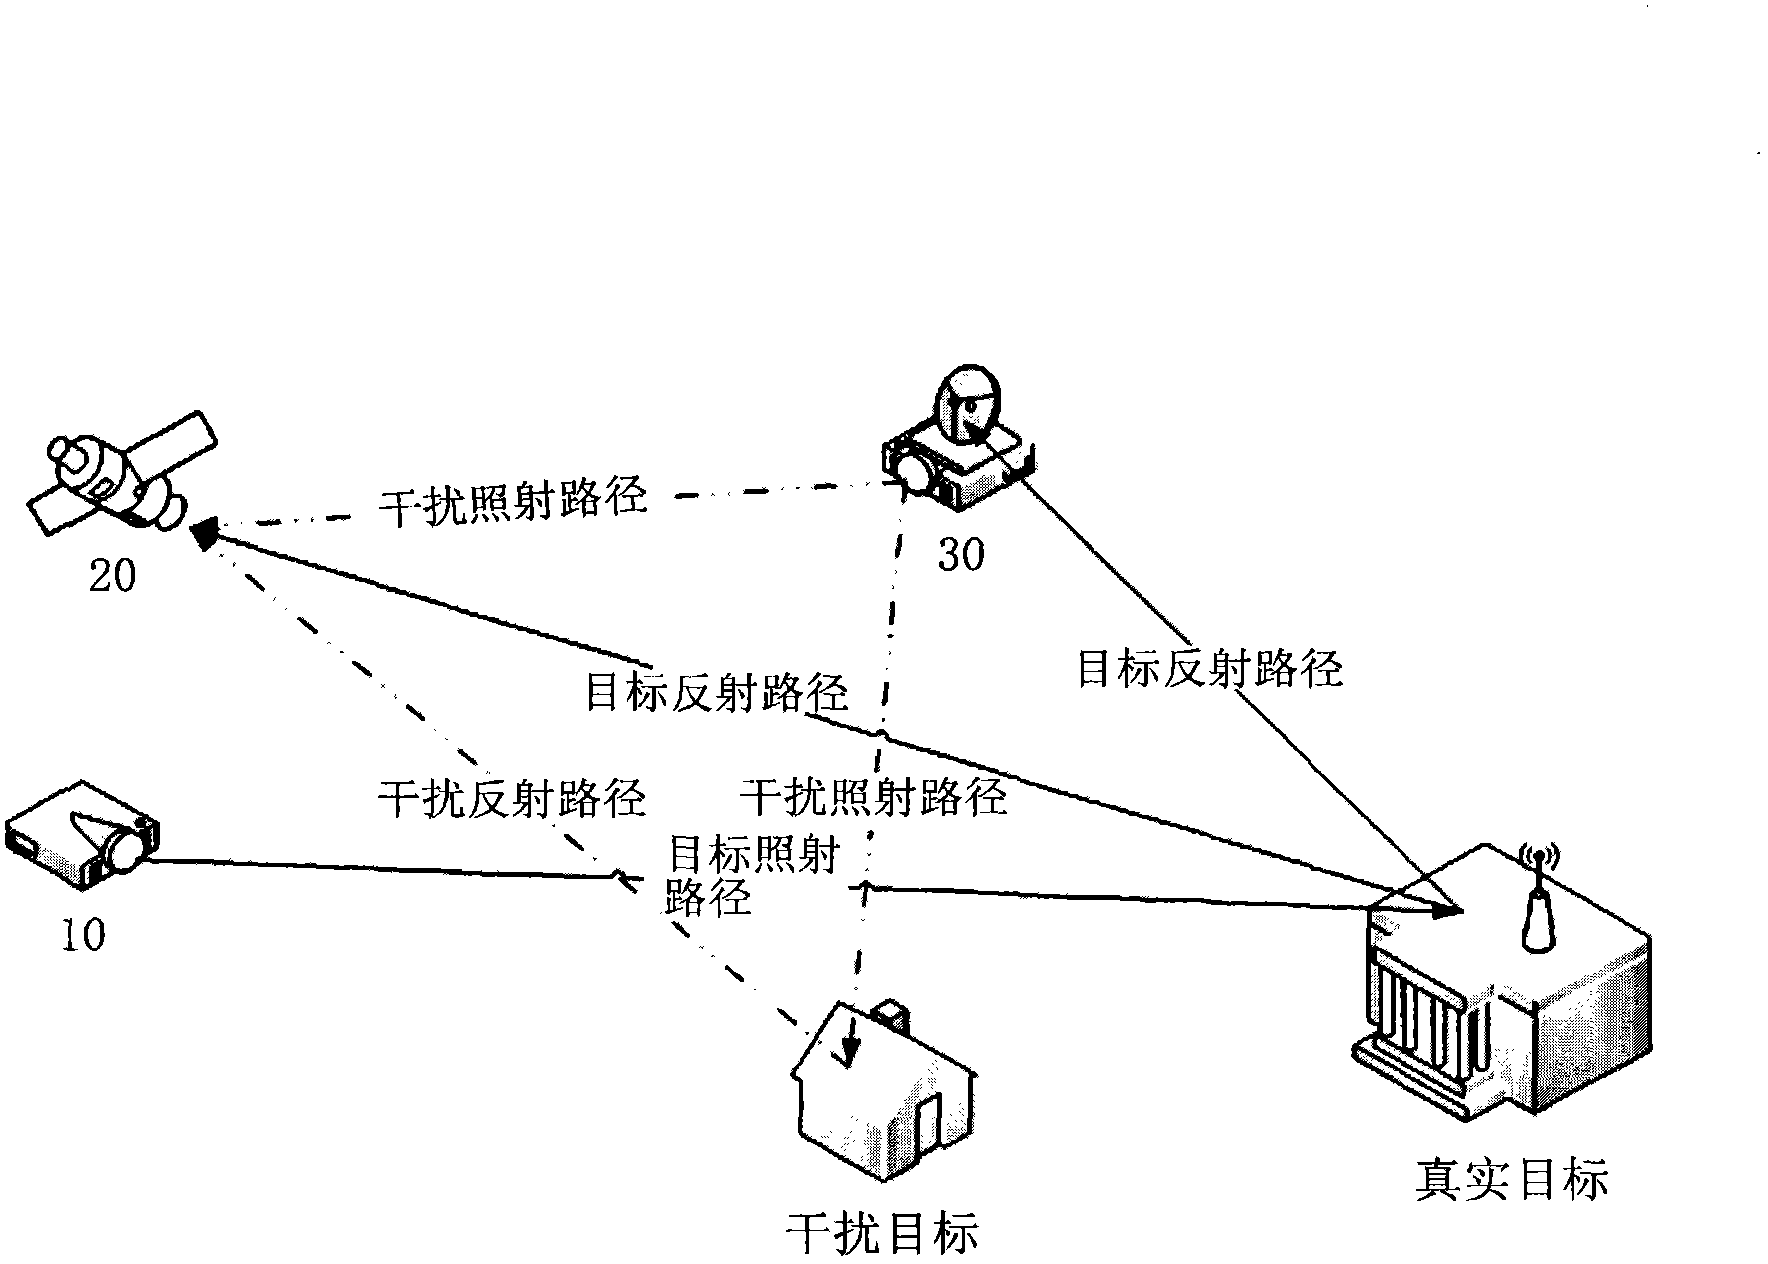 Confrontation method for laser active jamming